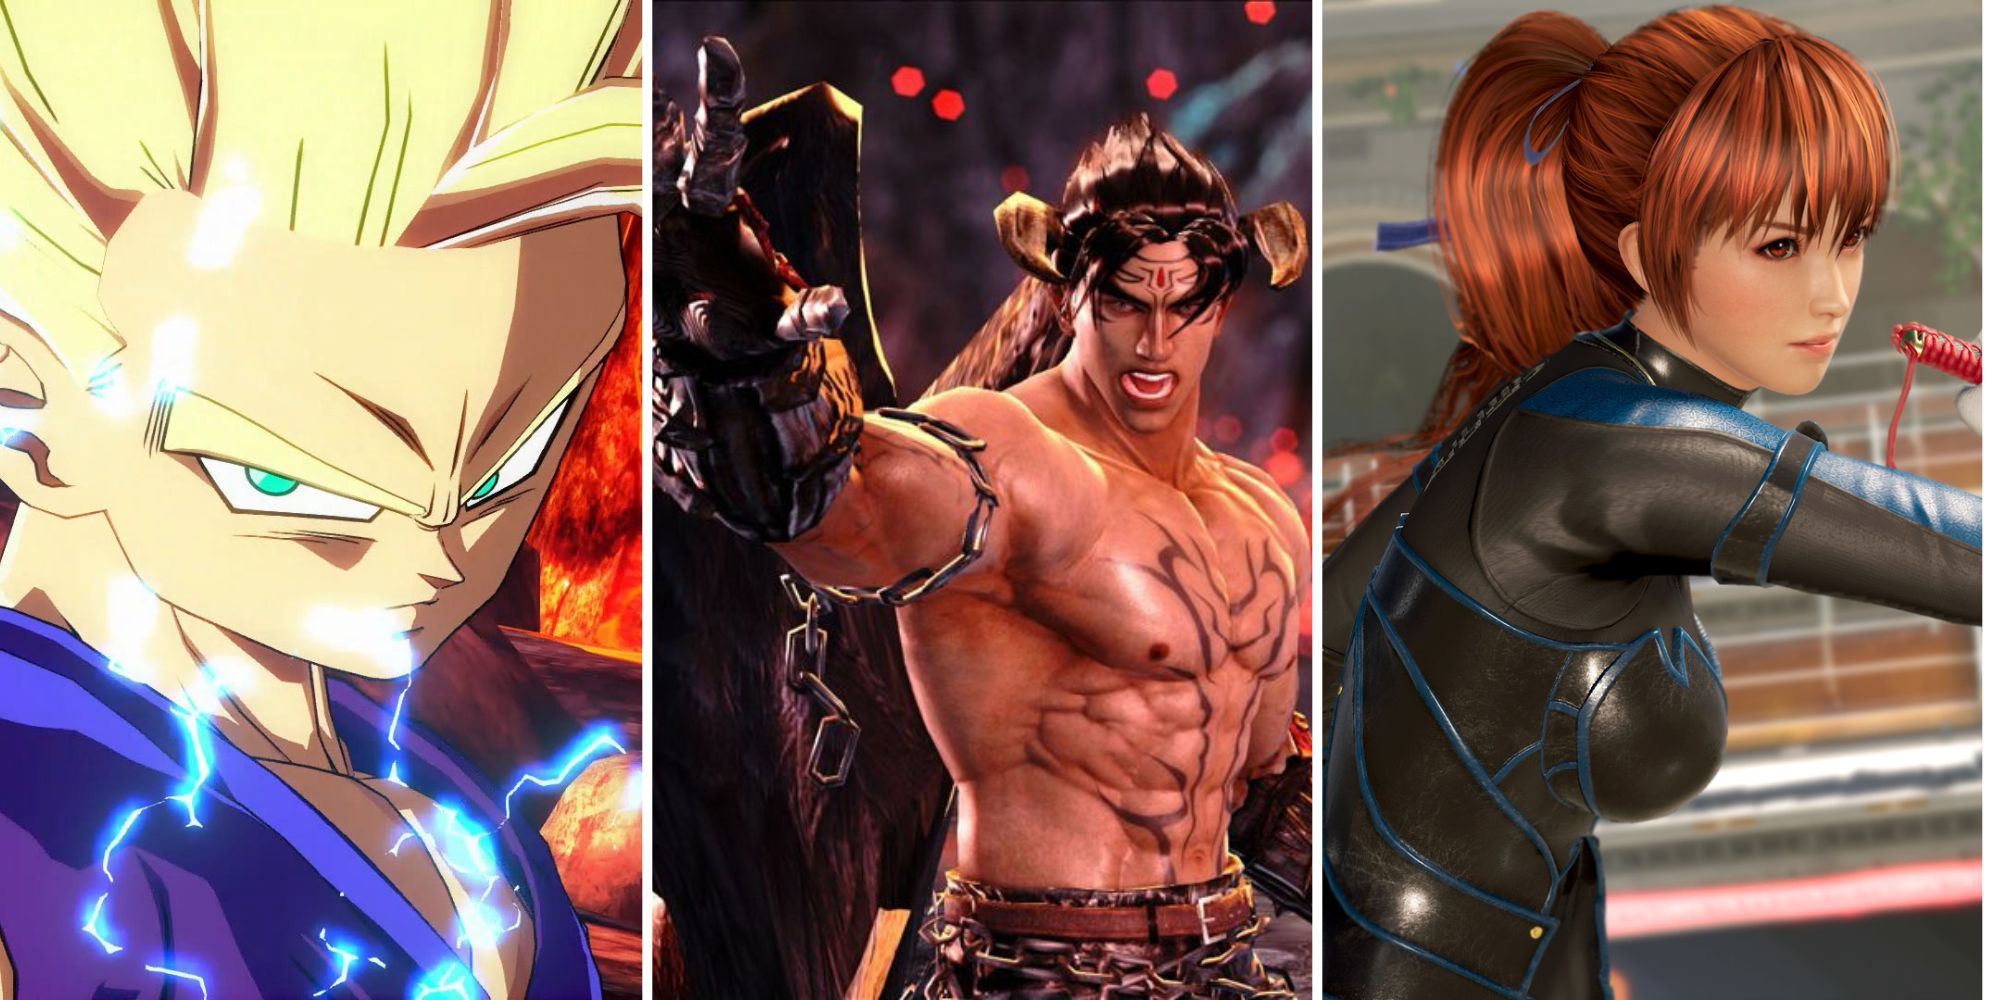 Collage of the Hardest Fighting Games (Dragon Ball FighterZ, Tekken 7, Dead or Alive 6)